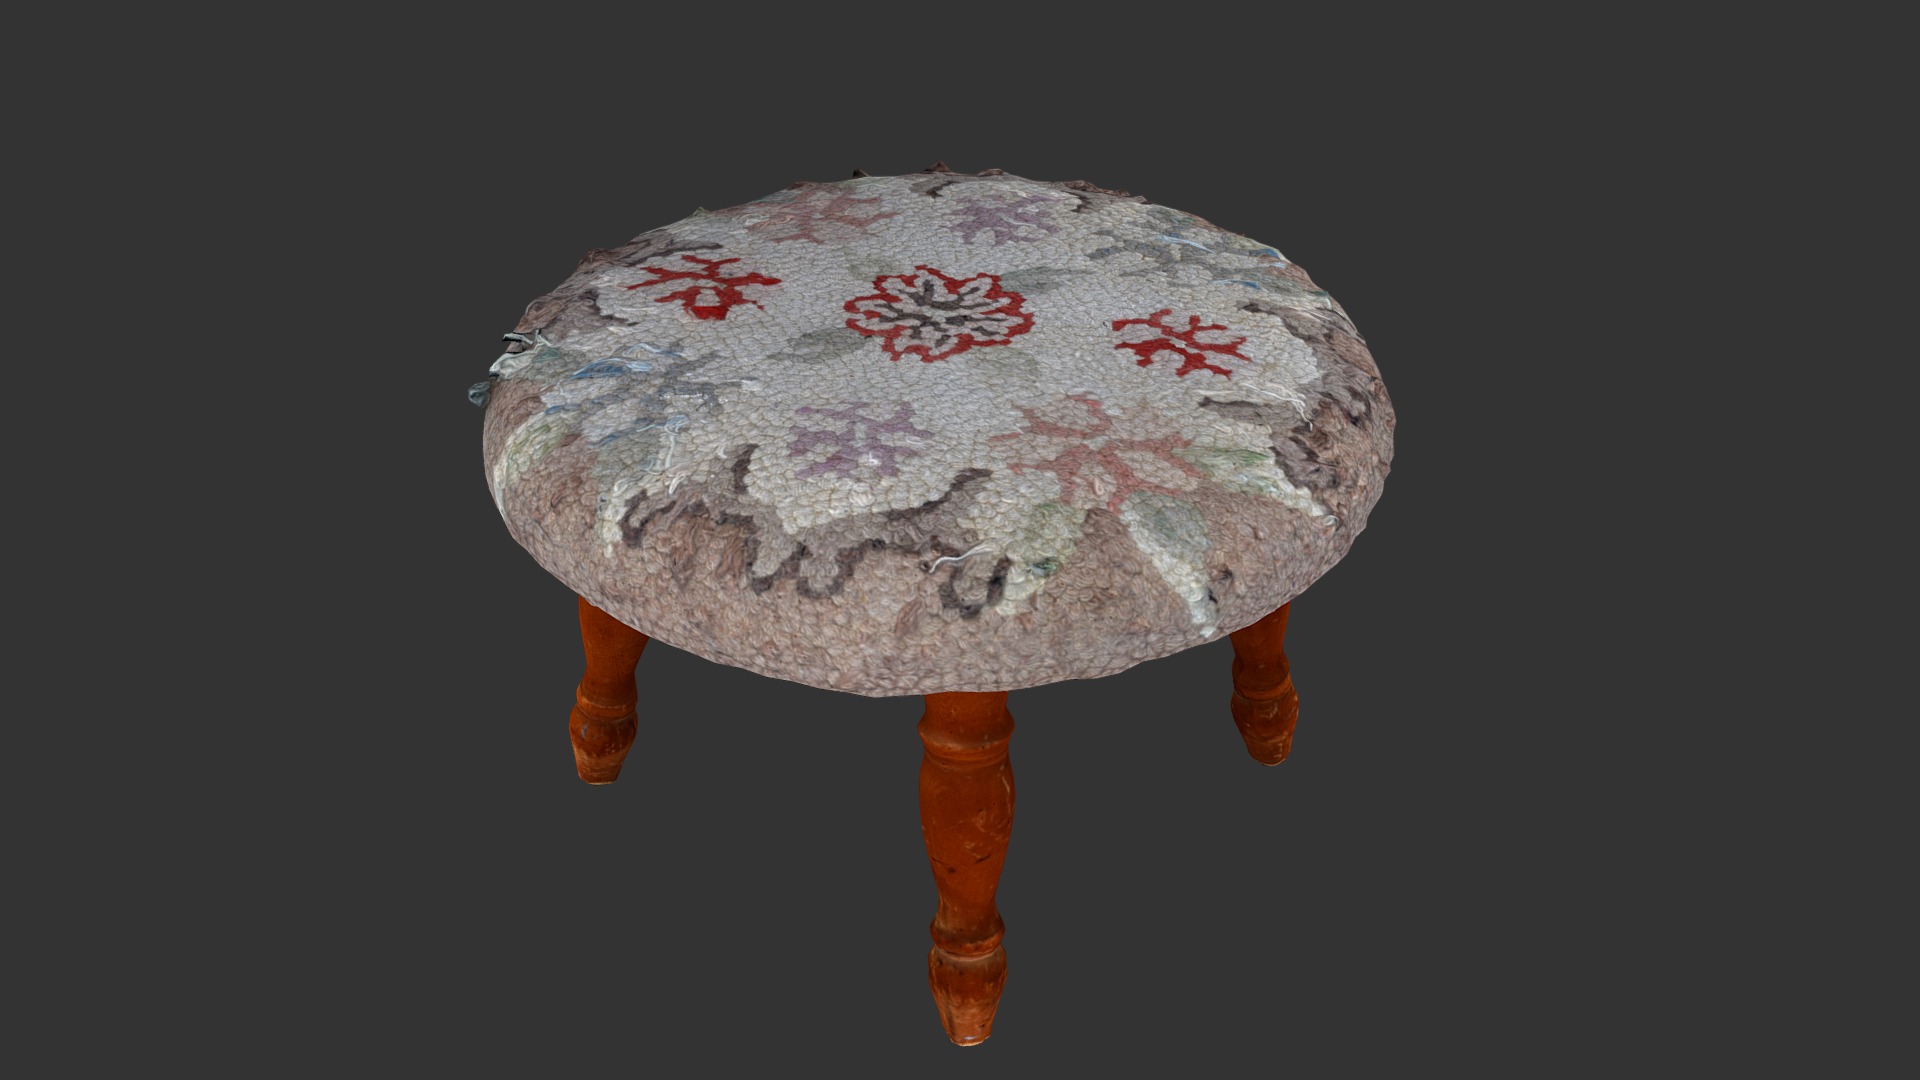 3D model Photogrammetry Scan of Footstool - This is a 3D model of the Photogrammetry Scan of Footstool. The 3D model is about a mushroom with a red and white design on it.